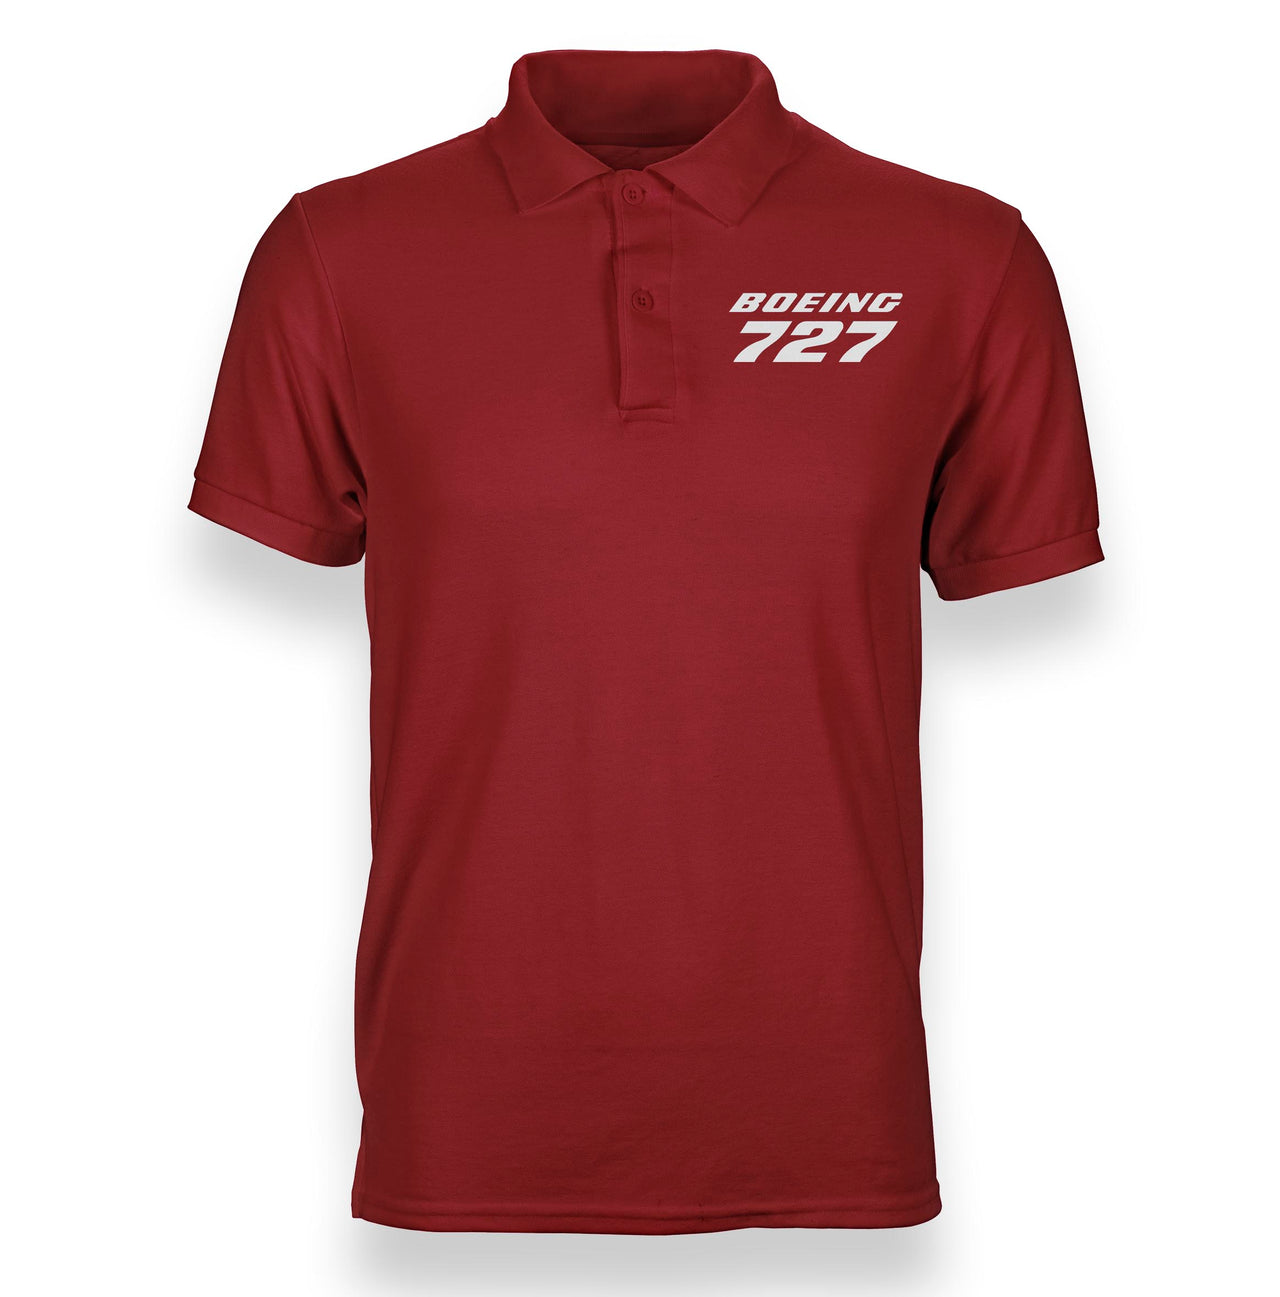 Boeing 727 & Text Designed Polo T-Shirts